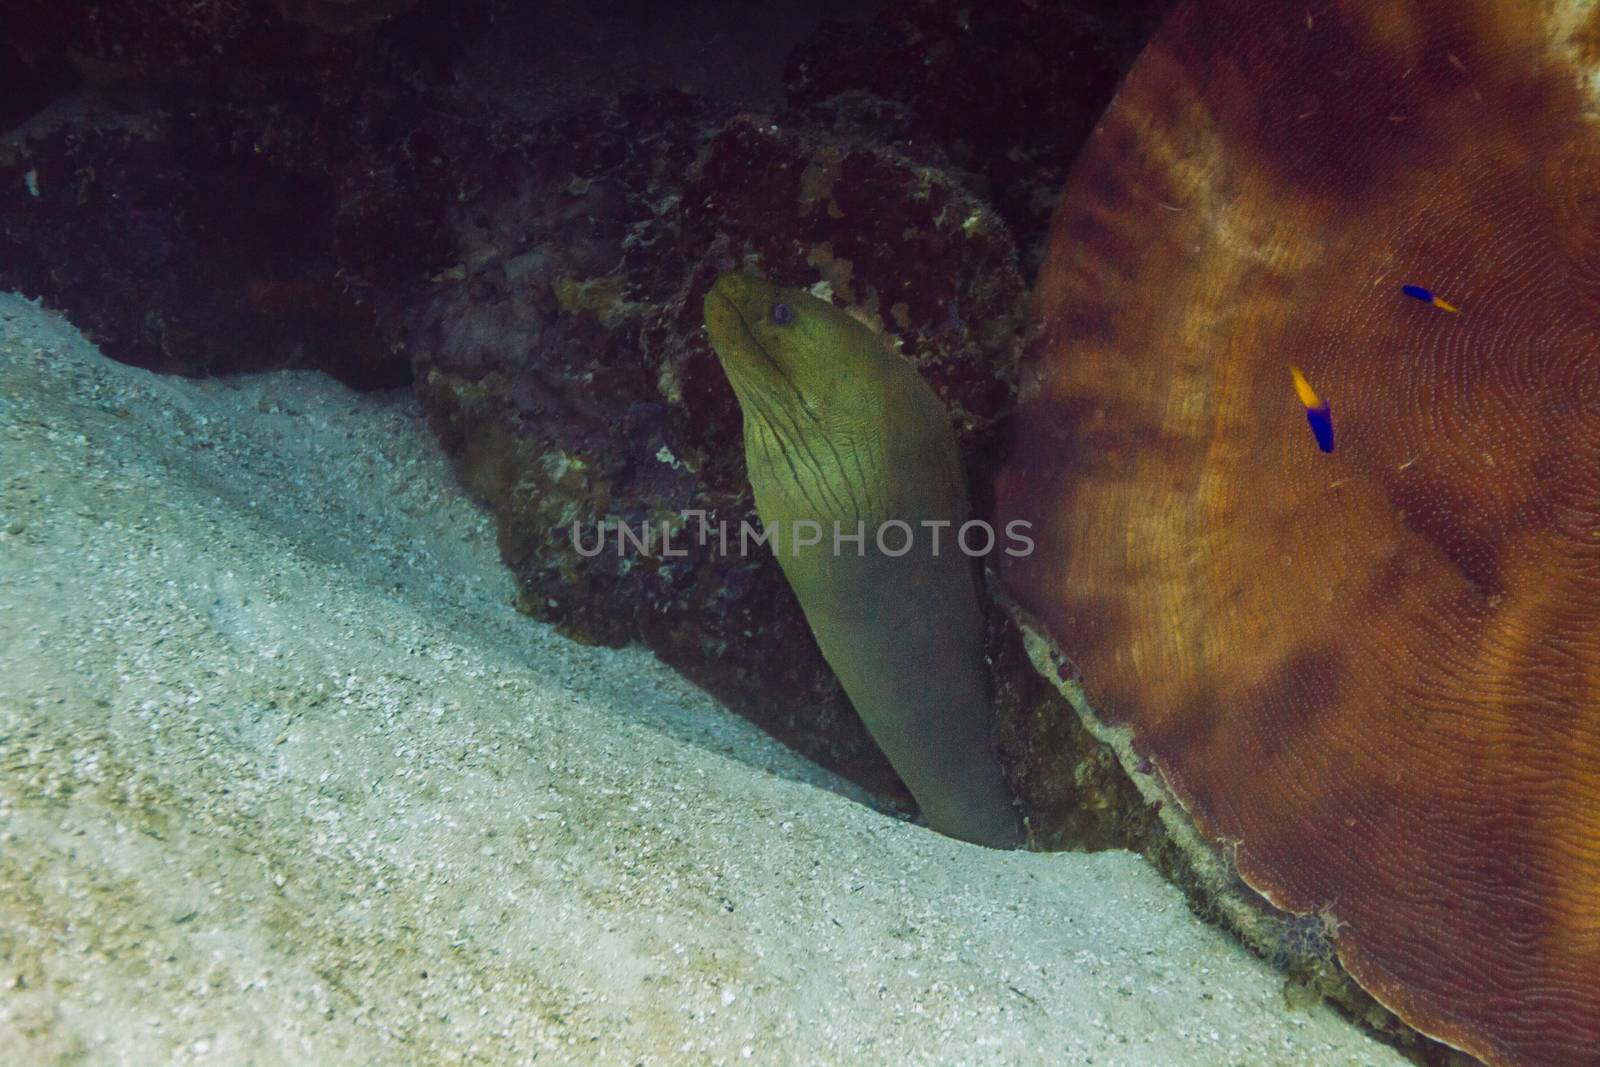 Gymnothorax funebris coming out of a crevace in a coral reef